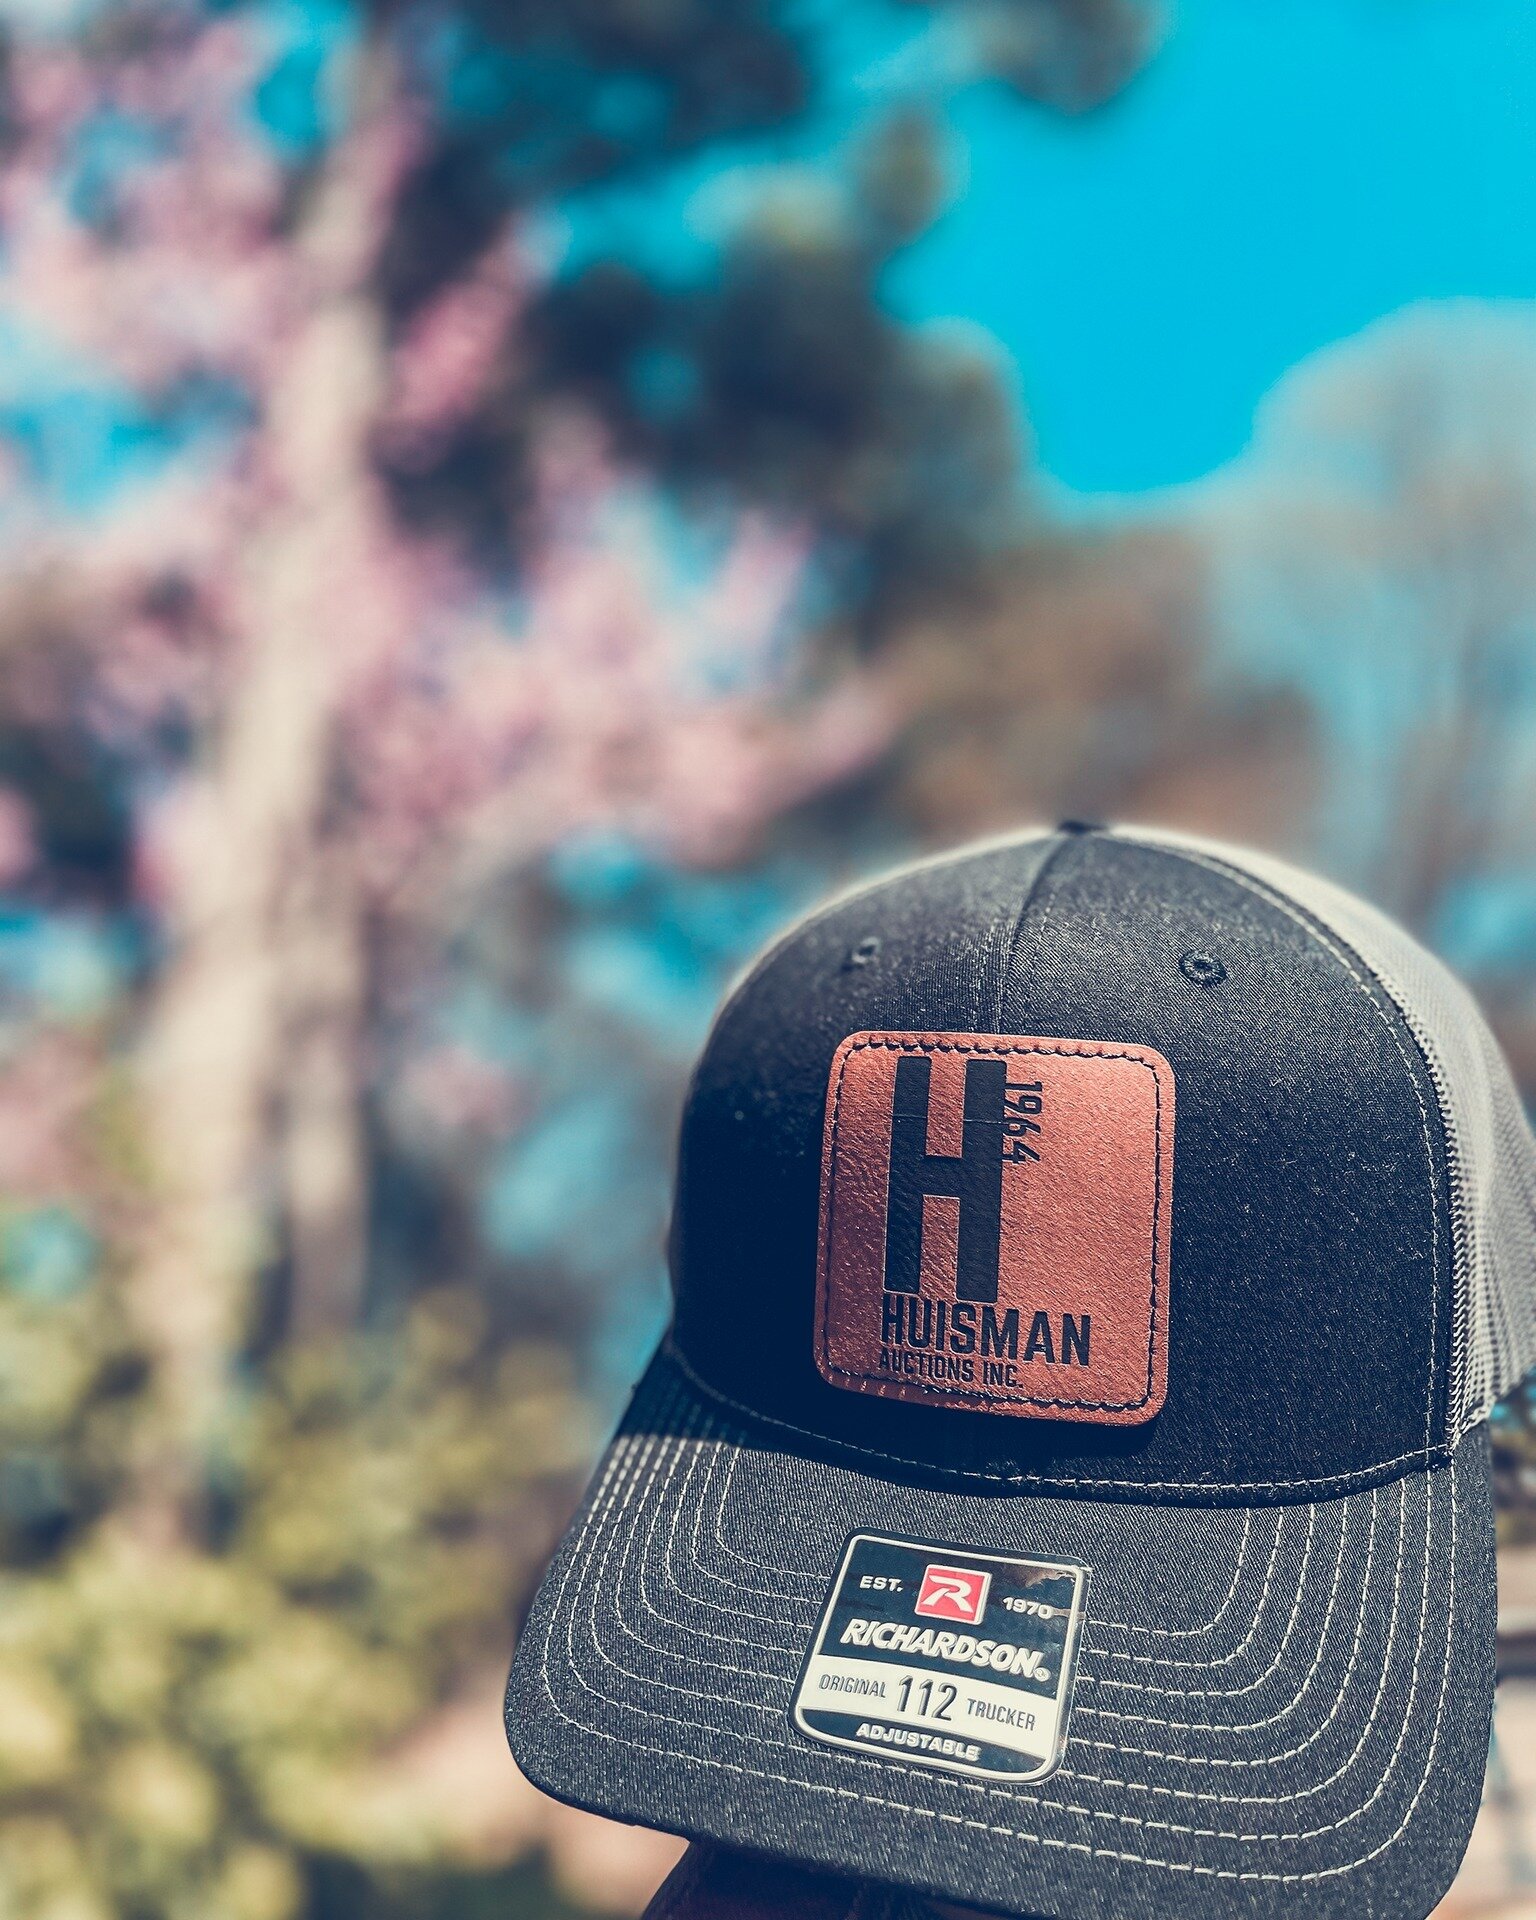 Shooooooot...look at these new Richardson trucker hats w/ these sweet leatherette patches for the fine folks at Huisman Auctions Inc. You can check out more gear from this project right here tomorrow! Logo Design by Bear Tyler from @bullhdedpeanutco